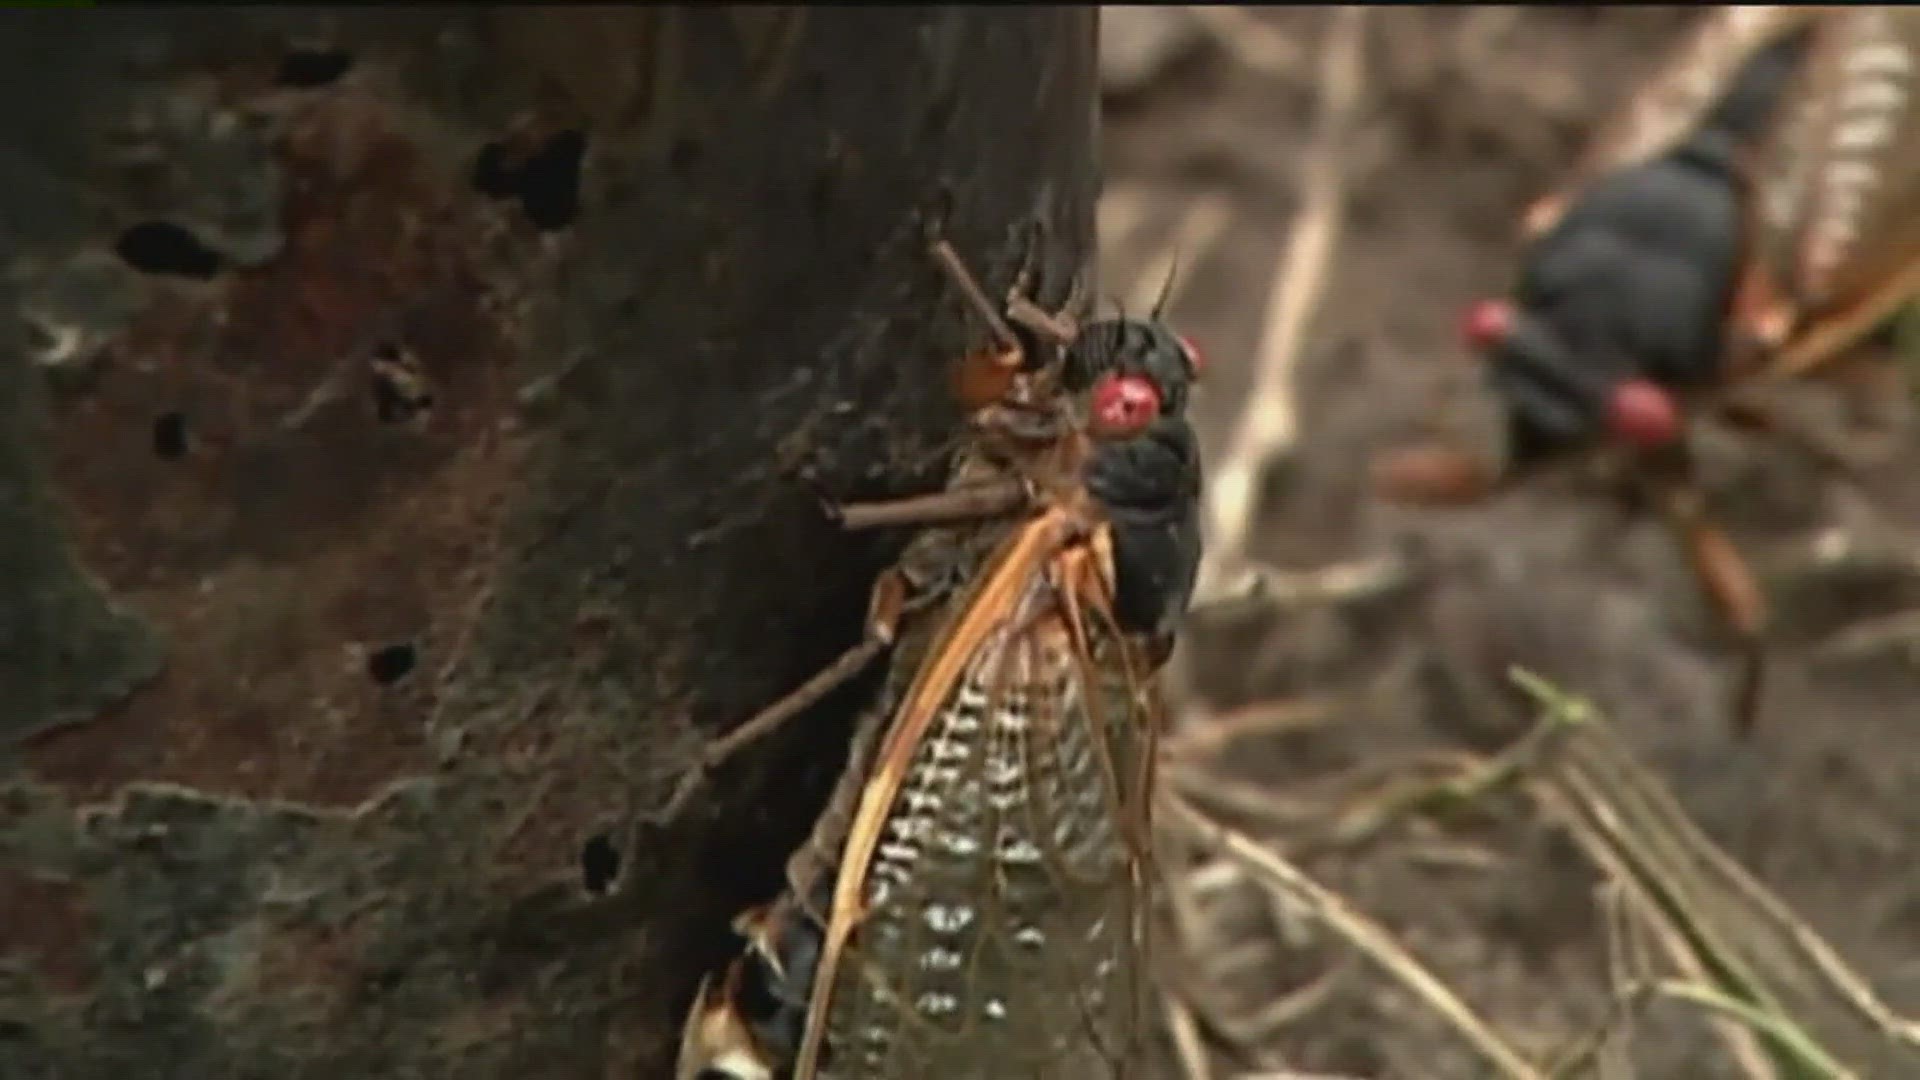 “These cicadas have telltale signs of infection: the back half of their abdomen has been replaced with a yellow/white ‘plug’ of fungus,” says Dr. Brian Lovett.